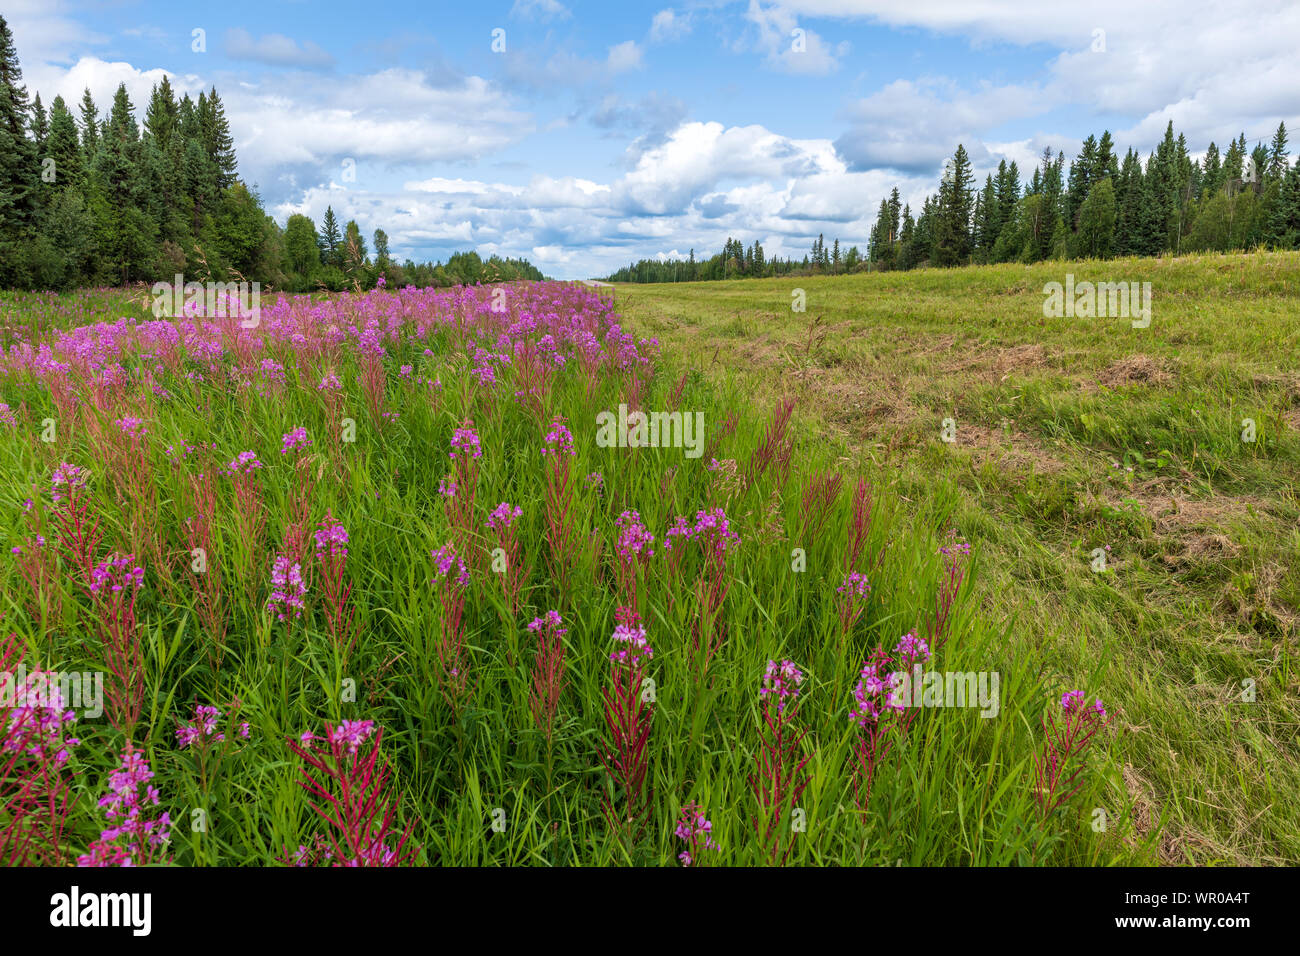 Fireweed blooms along the Alaska Highway in British Columbia, Canada Stock Photo